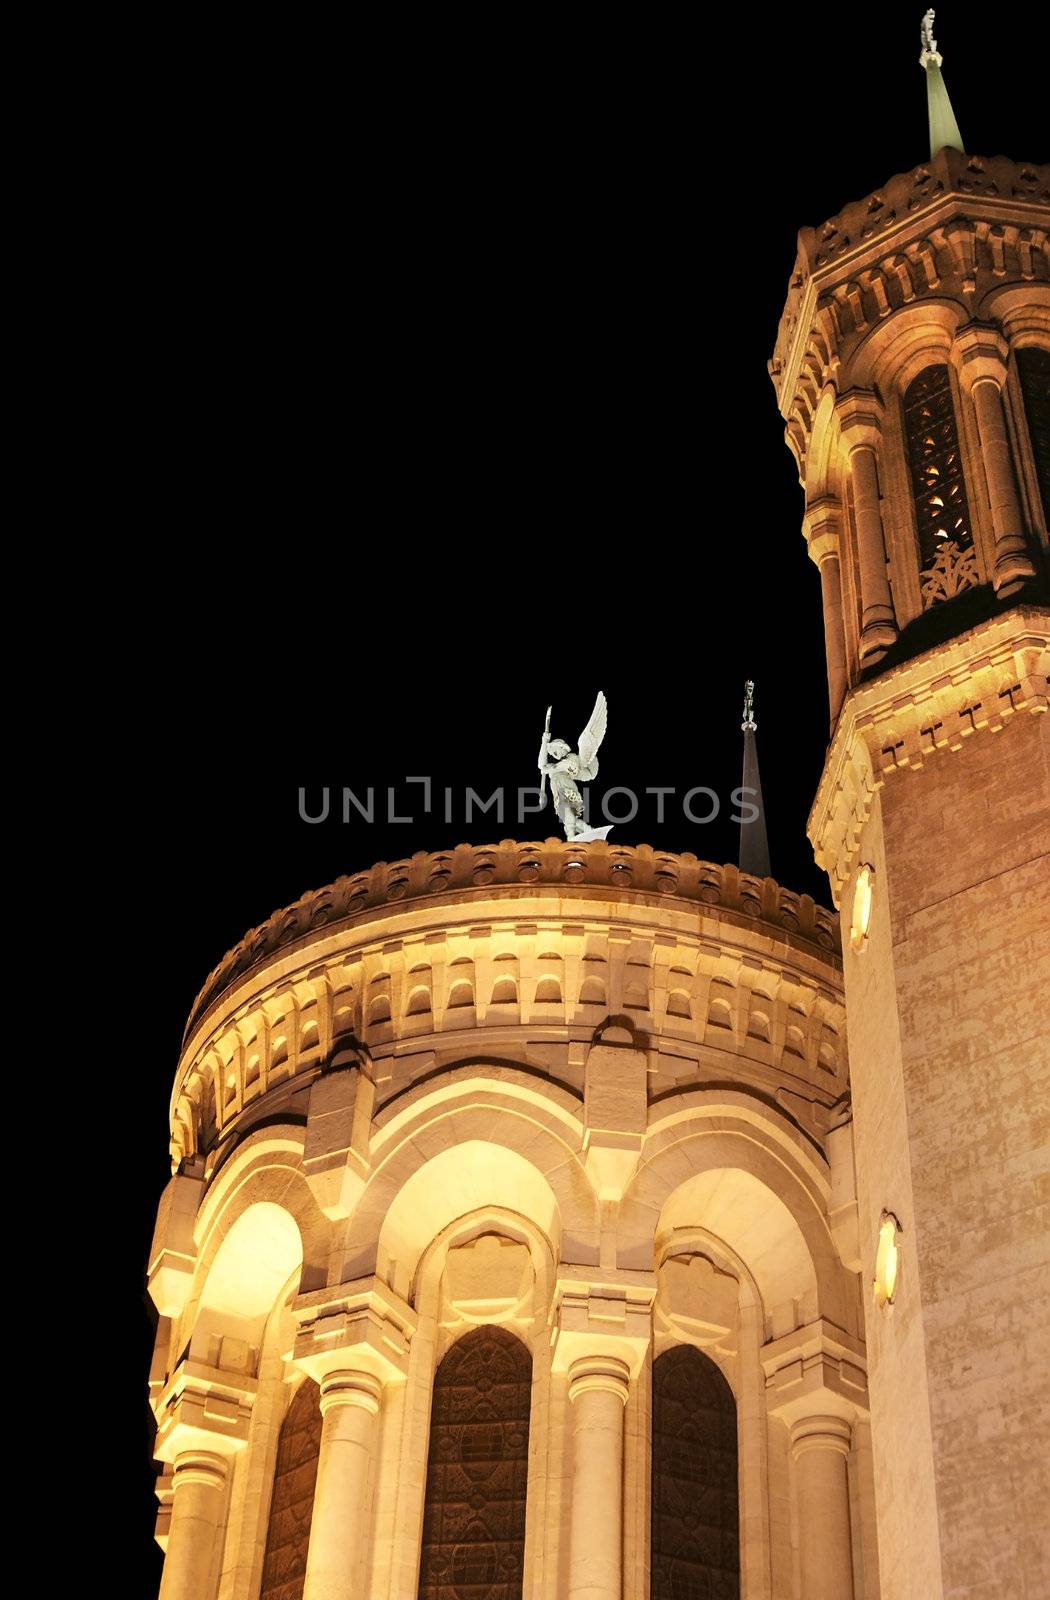 Notre-Dame de Fourviere basilica church at night with its beautiful architecture, tower and angel statue.